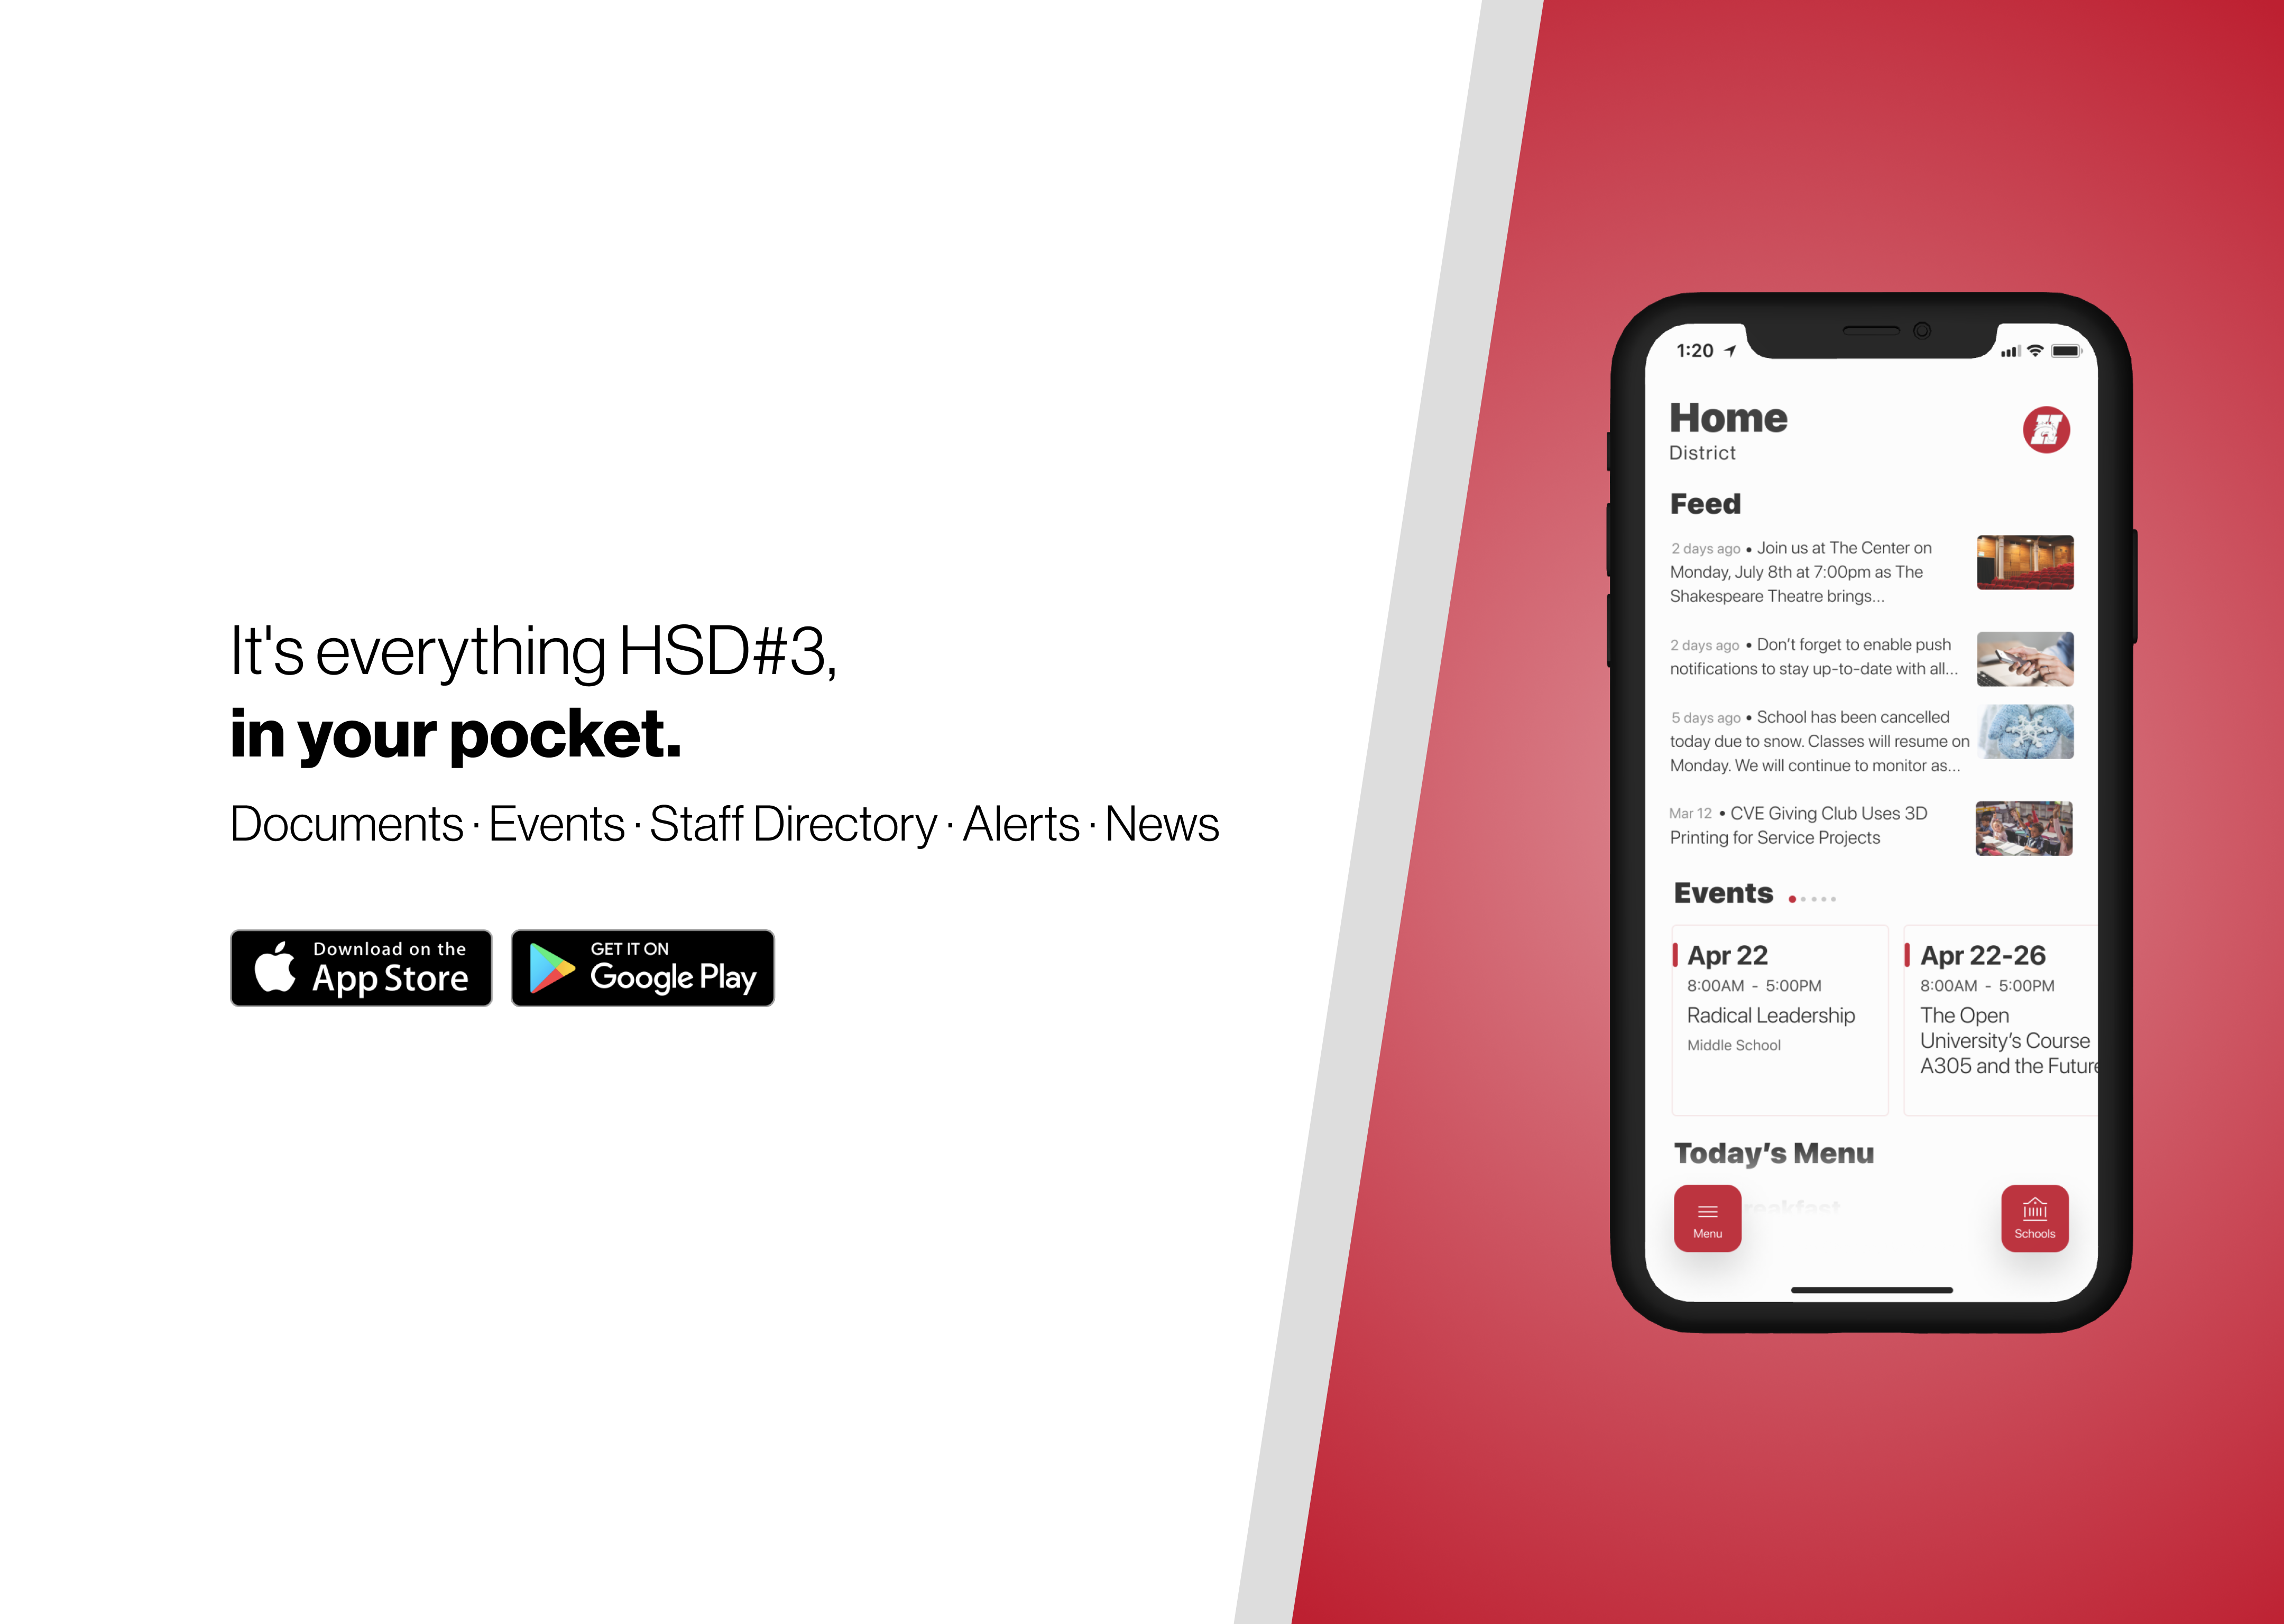 Download the HSD#3 App